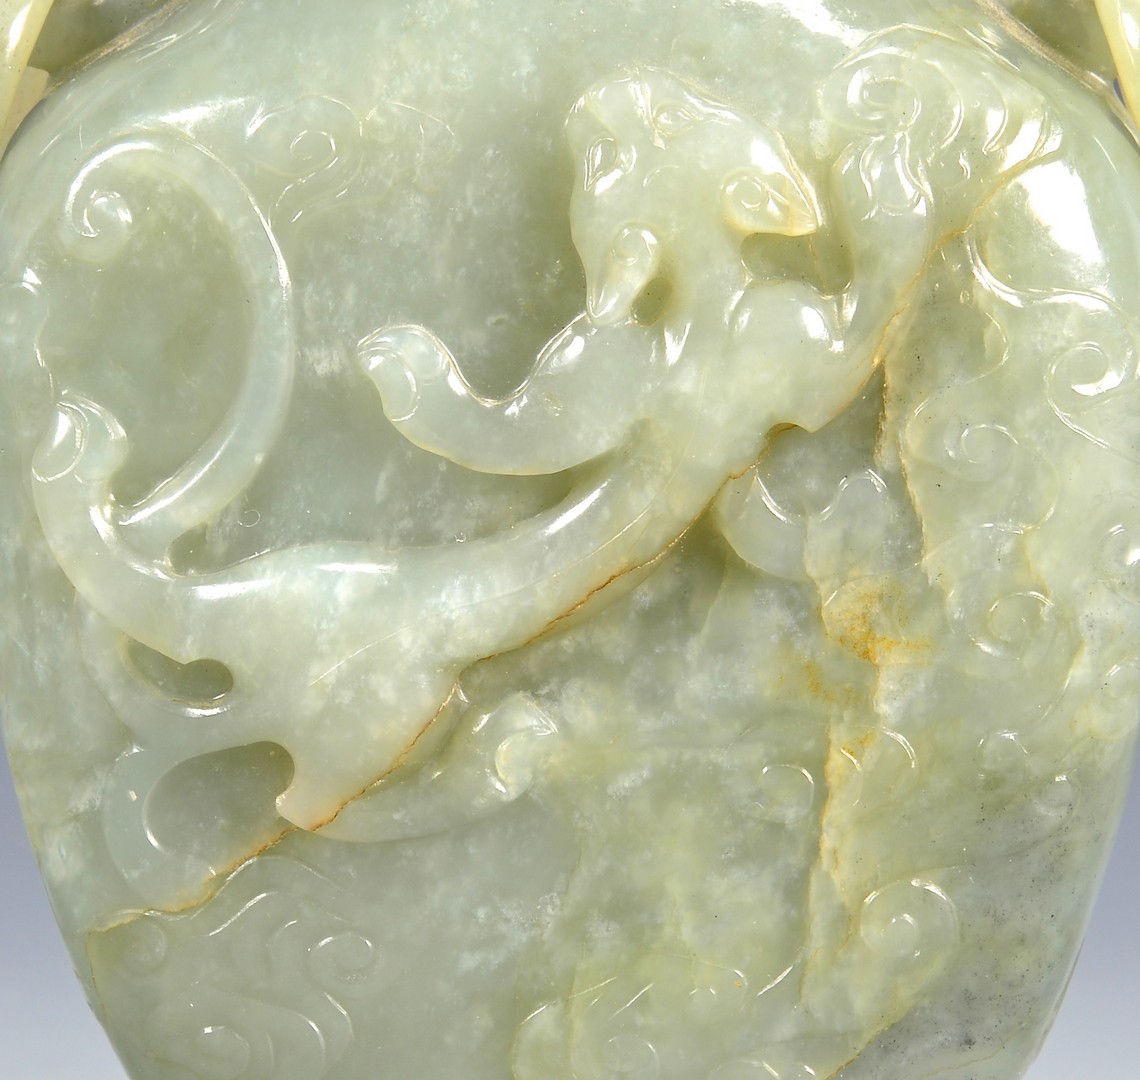 Lot 13: Jade Vase with Chih Lung Dragon and Bats